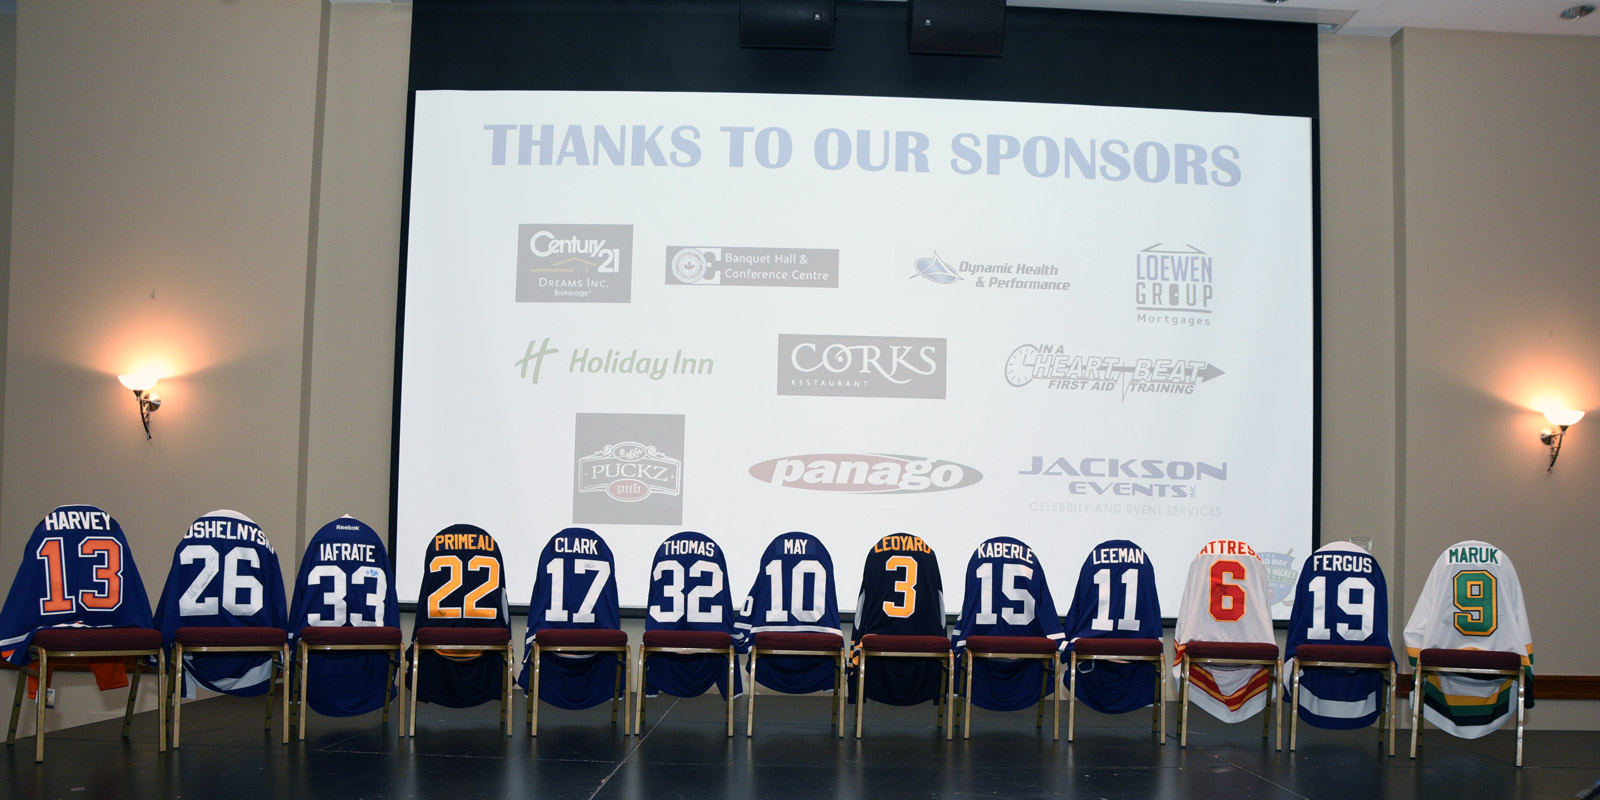 The sponsors logos displayed on a projector